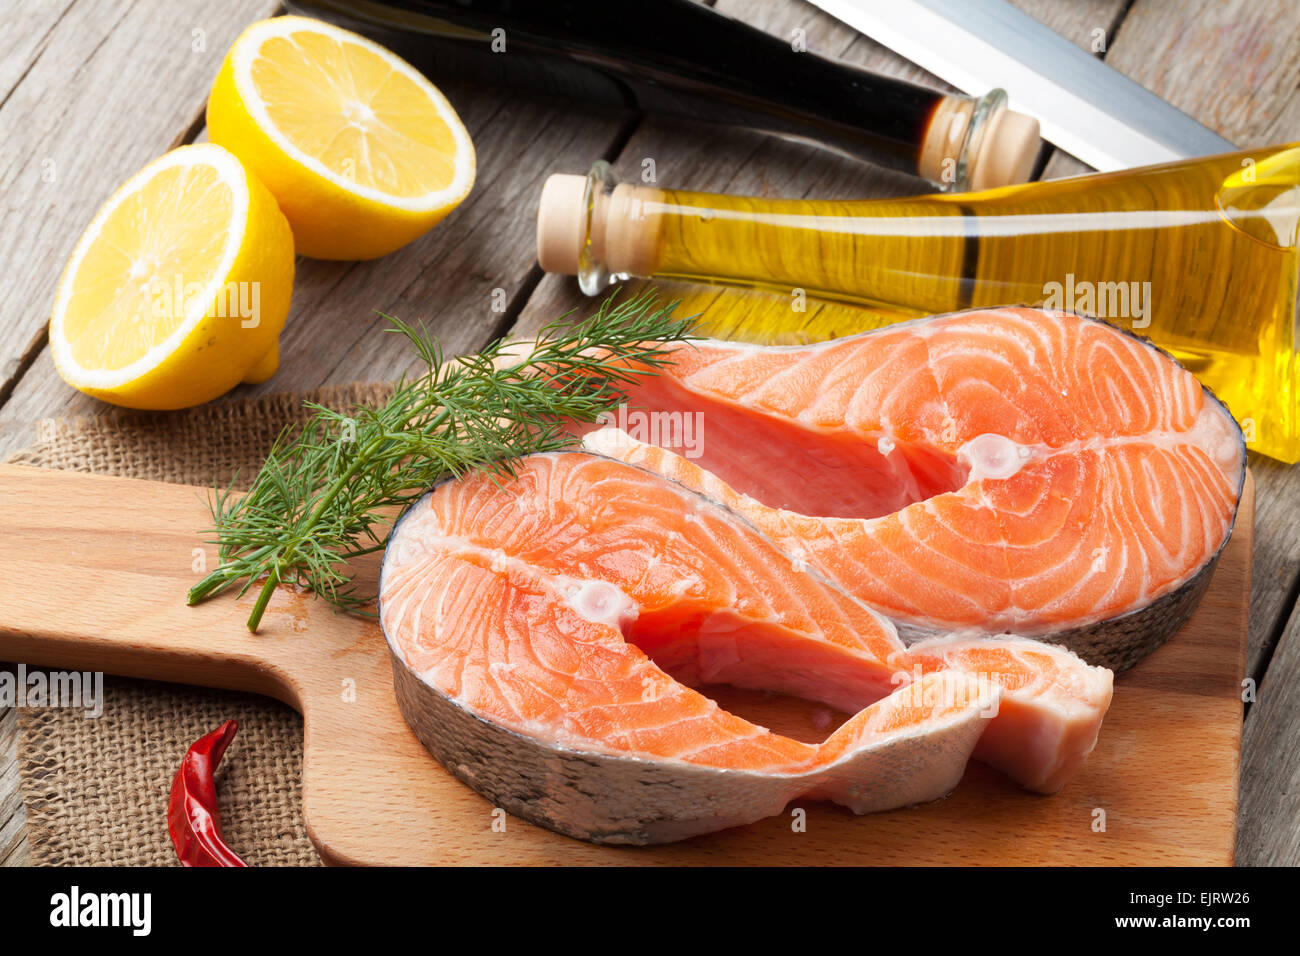 Salmon and spices on wooden table Stock Photo